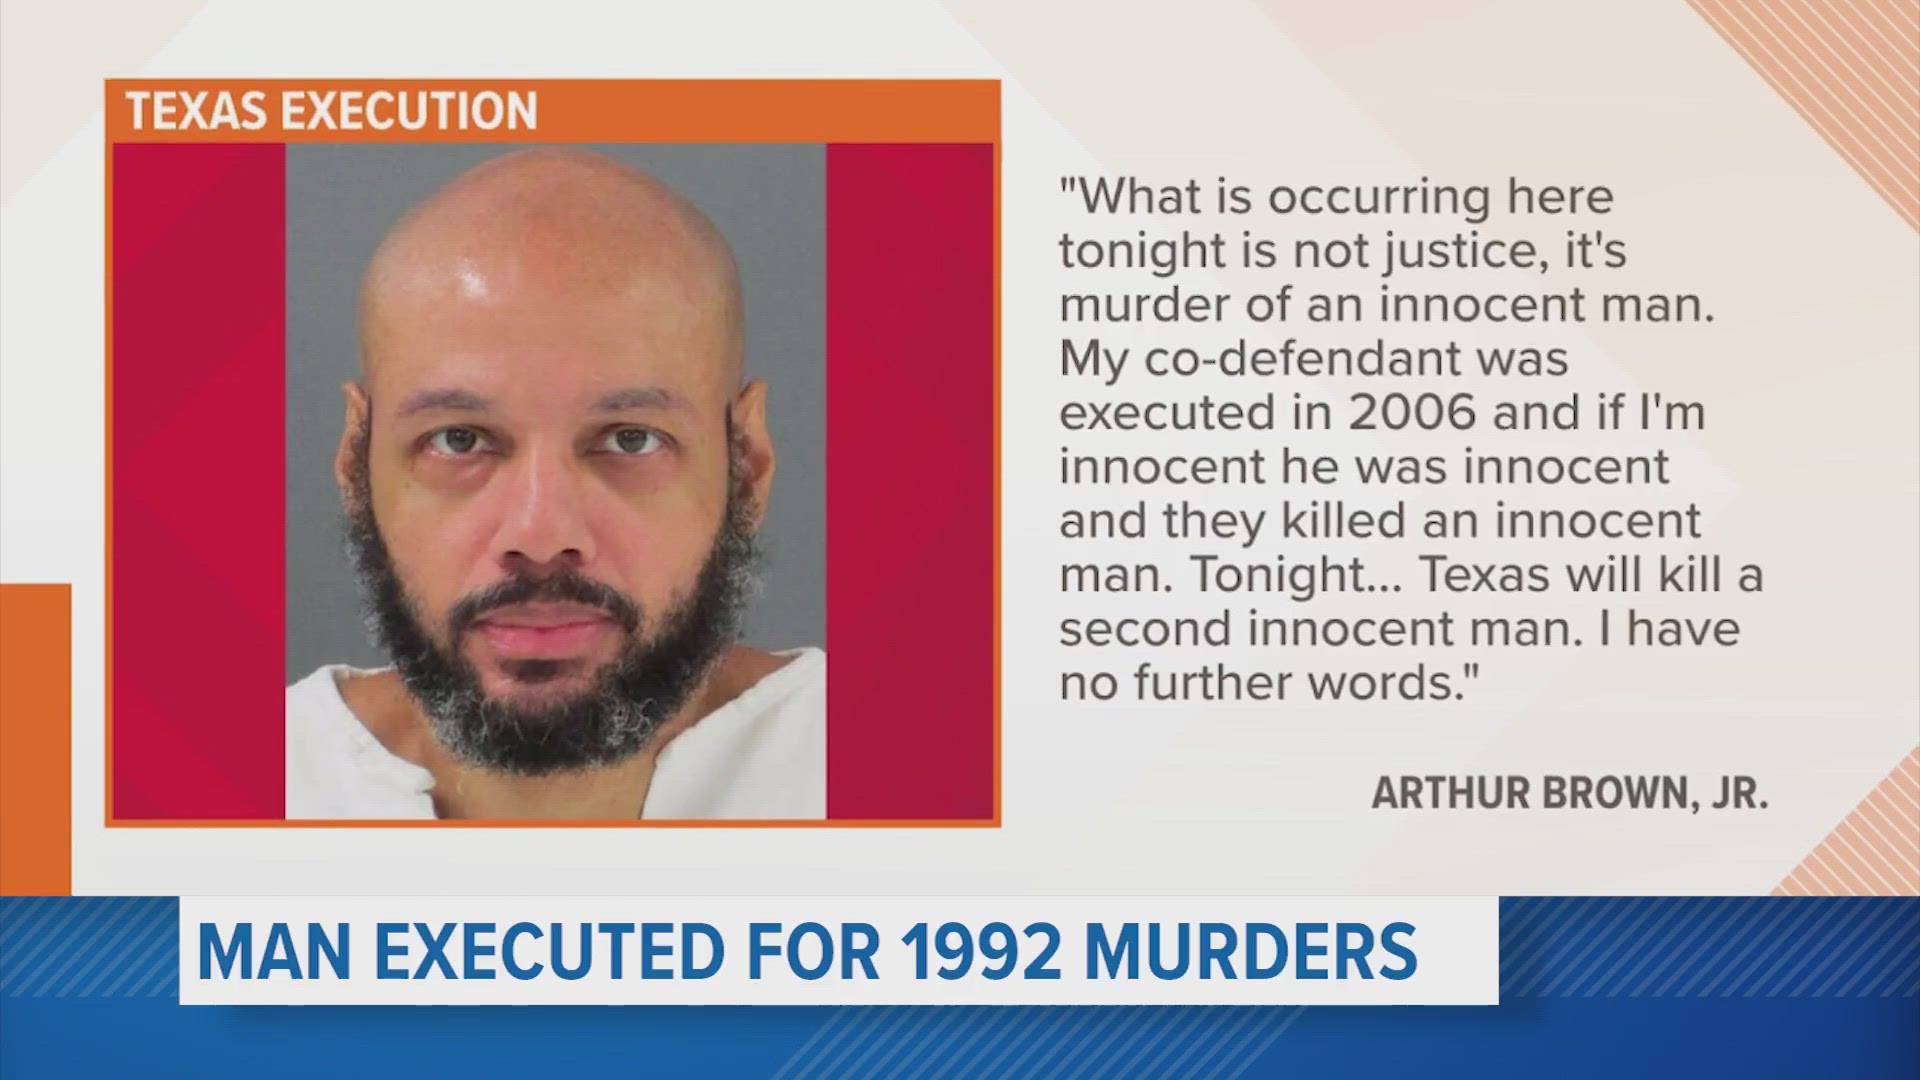 Arthur Brown Jr., 52, insisted he was innocent before receiving a lethal injection Thursday evening at the state penitentiary in Huntsville.